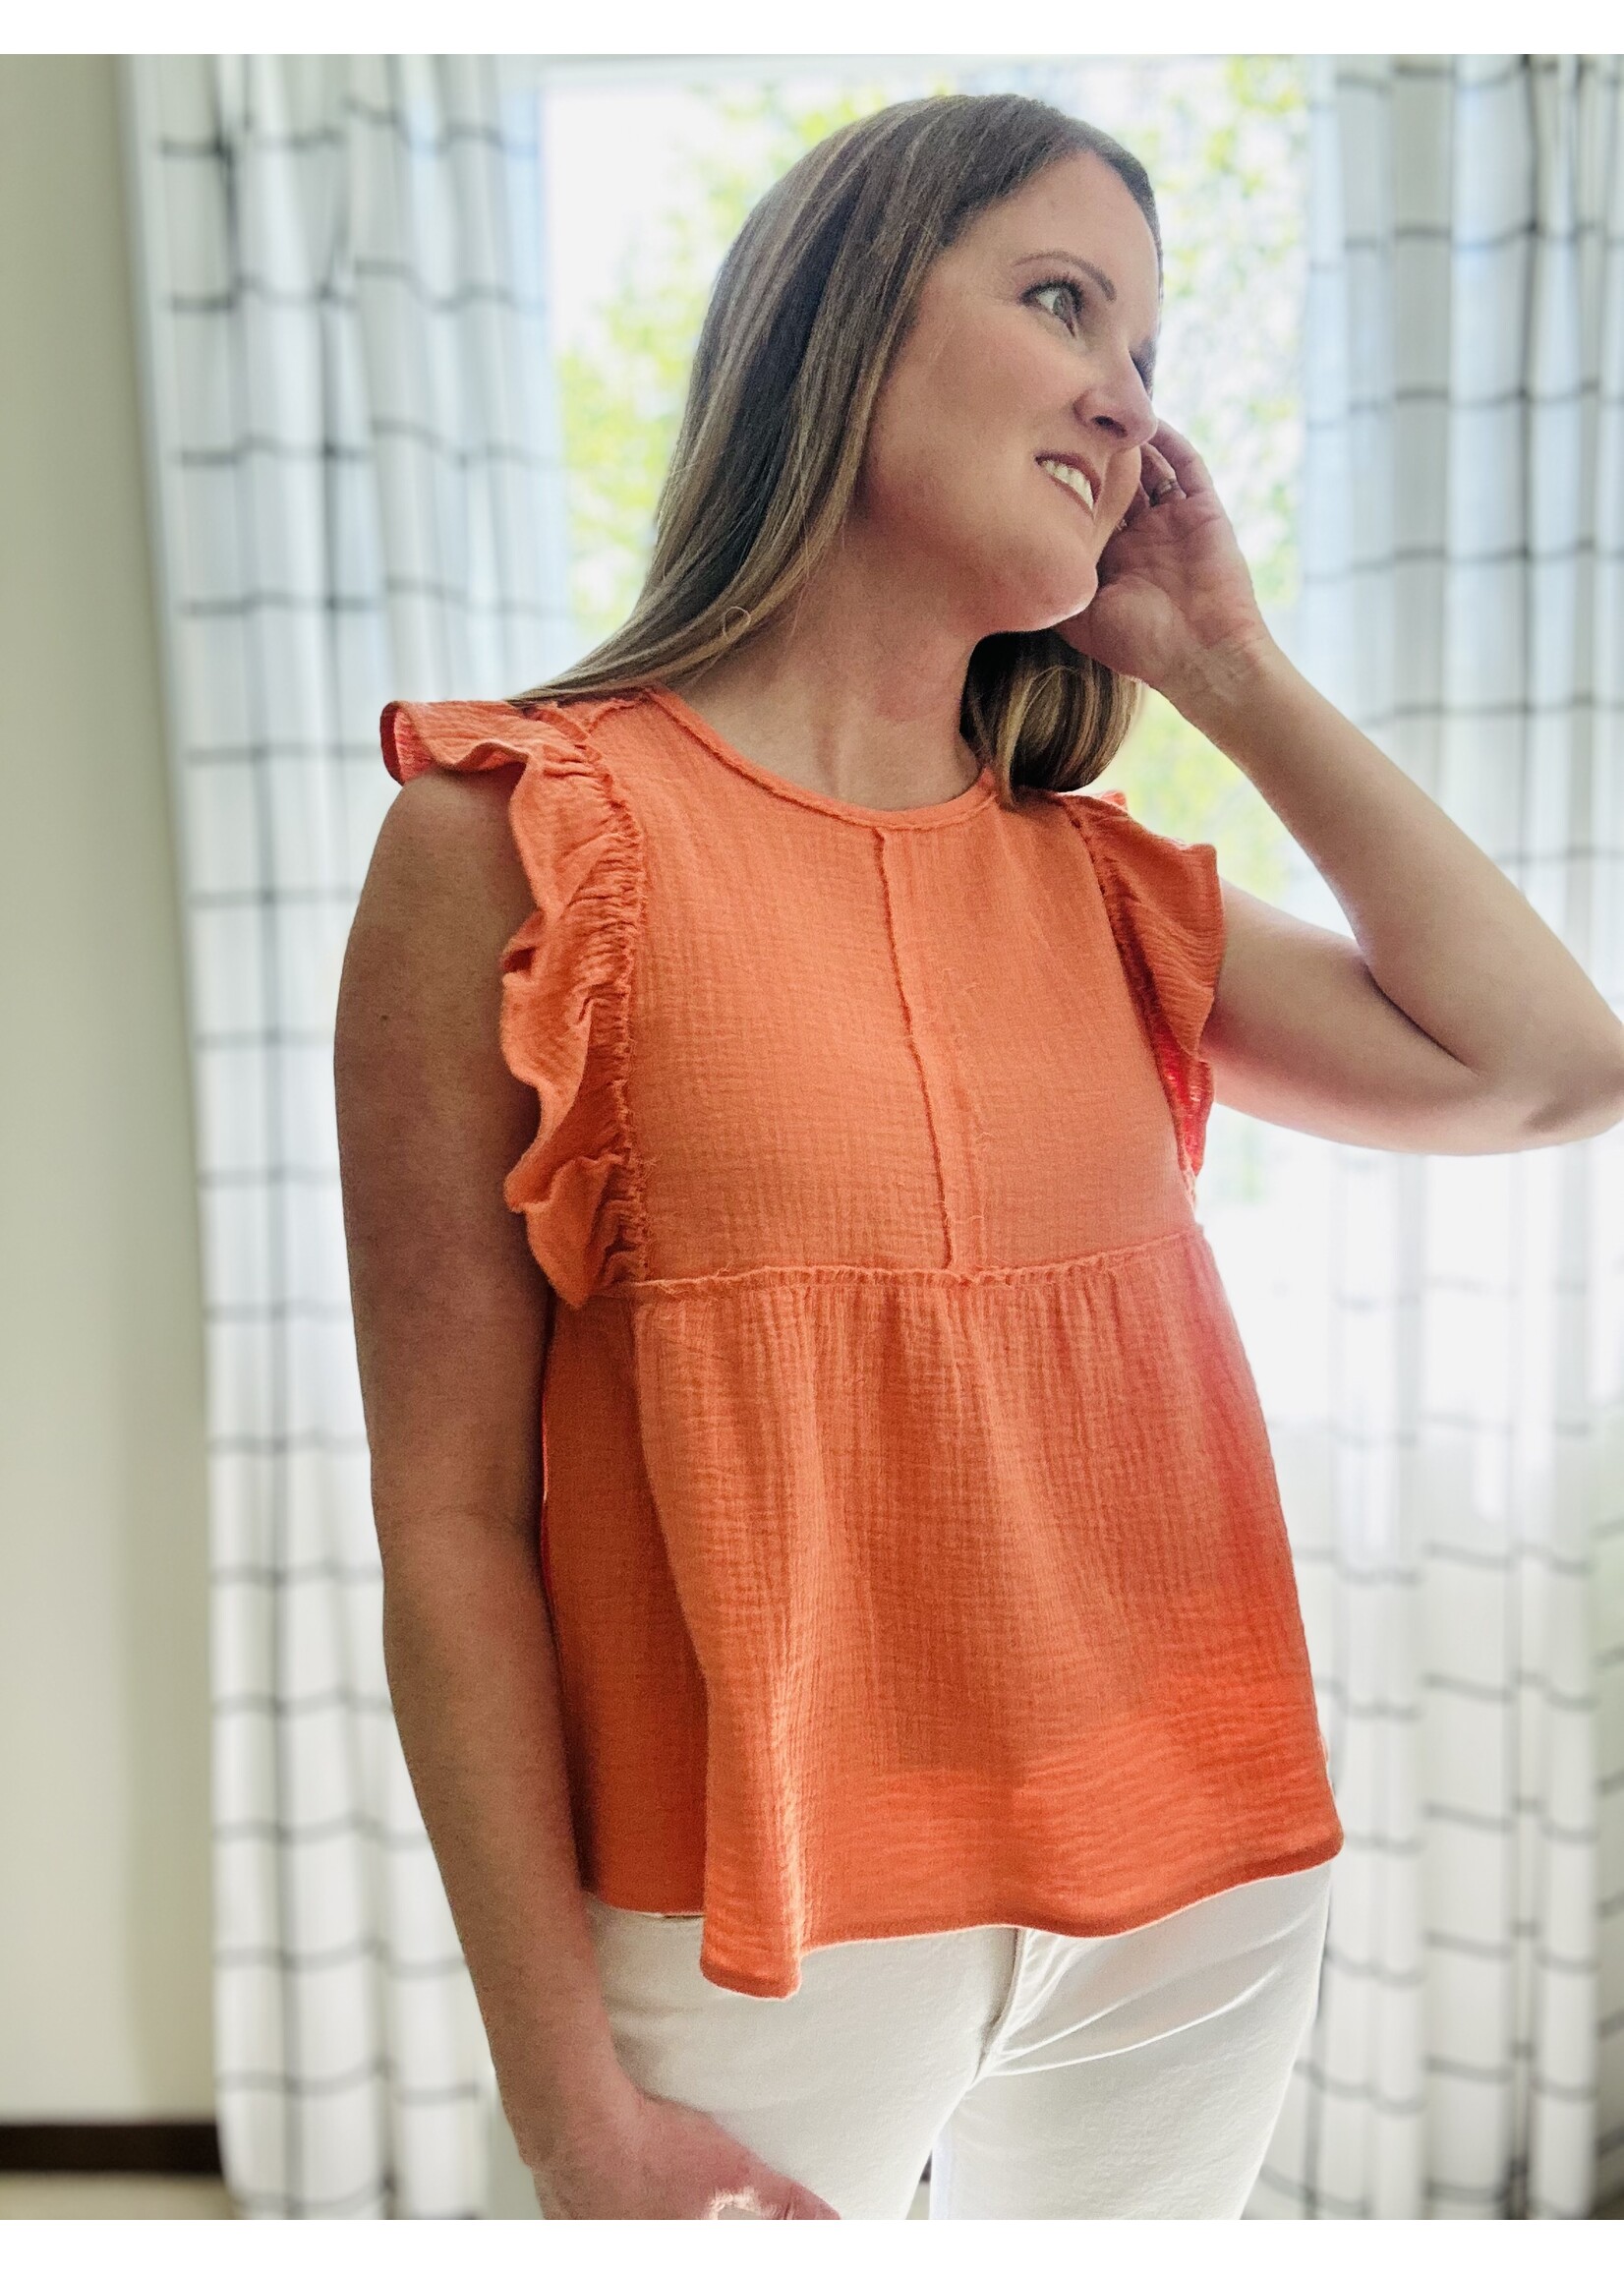 The McKenzie Top in Coral